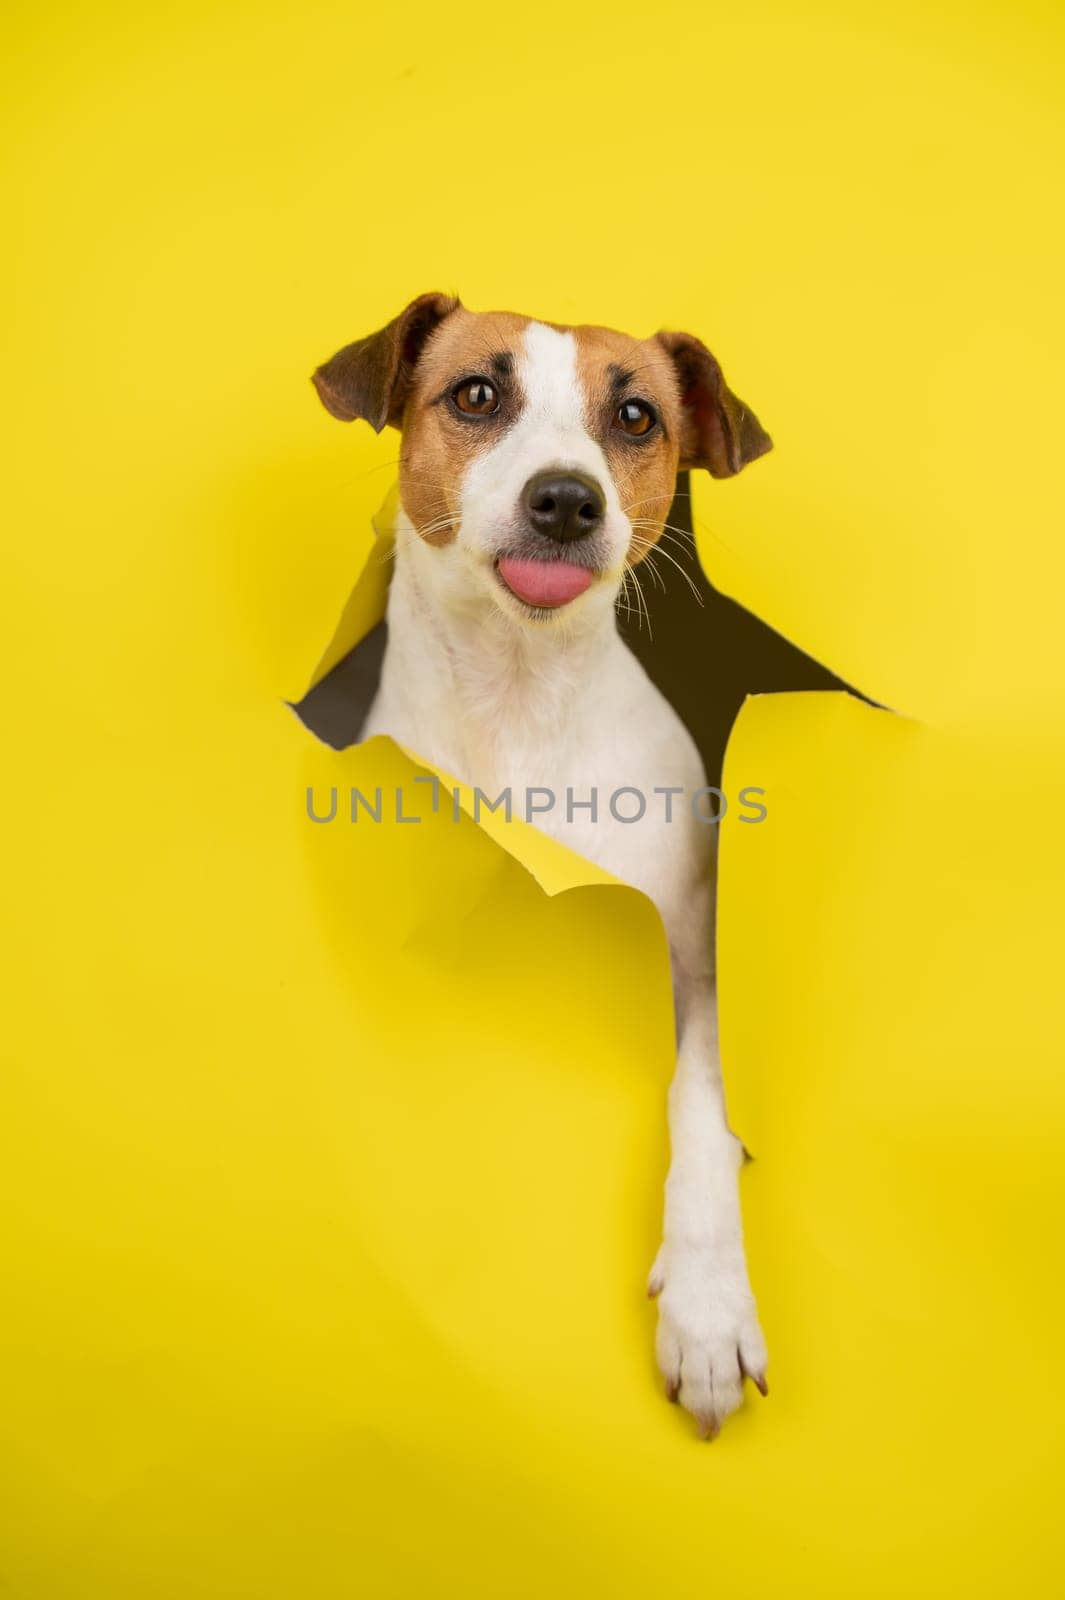 Cute Jack Russell Terrier dog tearing up yellow cardboard background. Vertical photo. by mrwed54